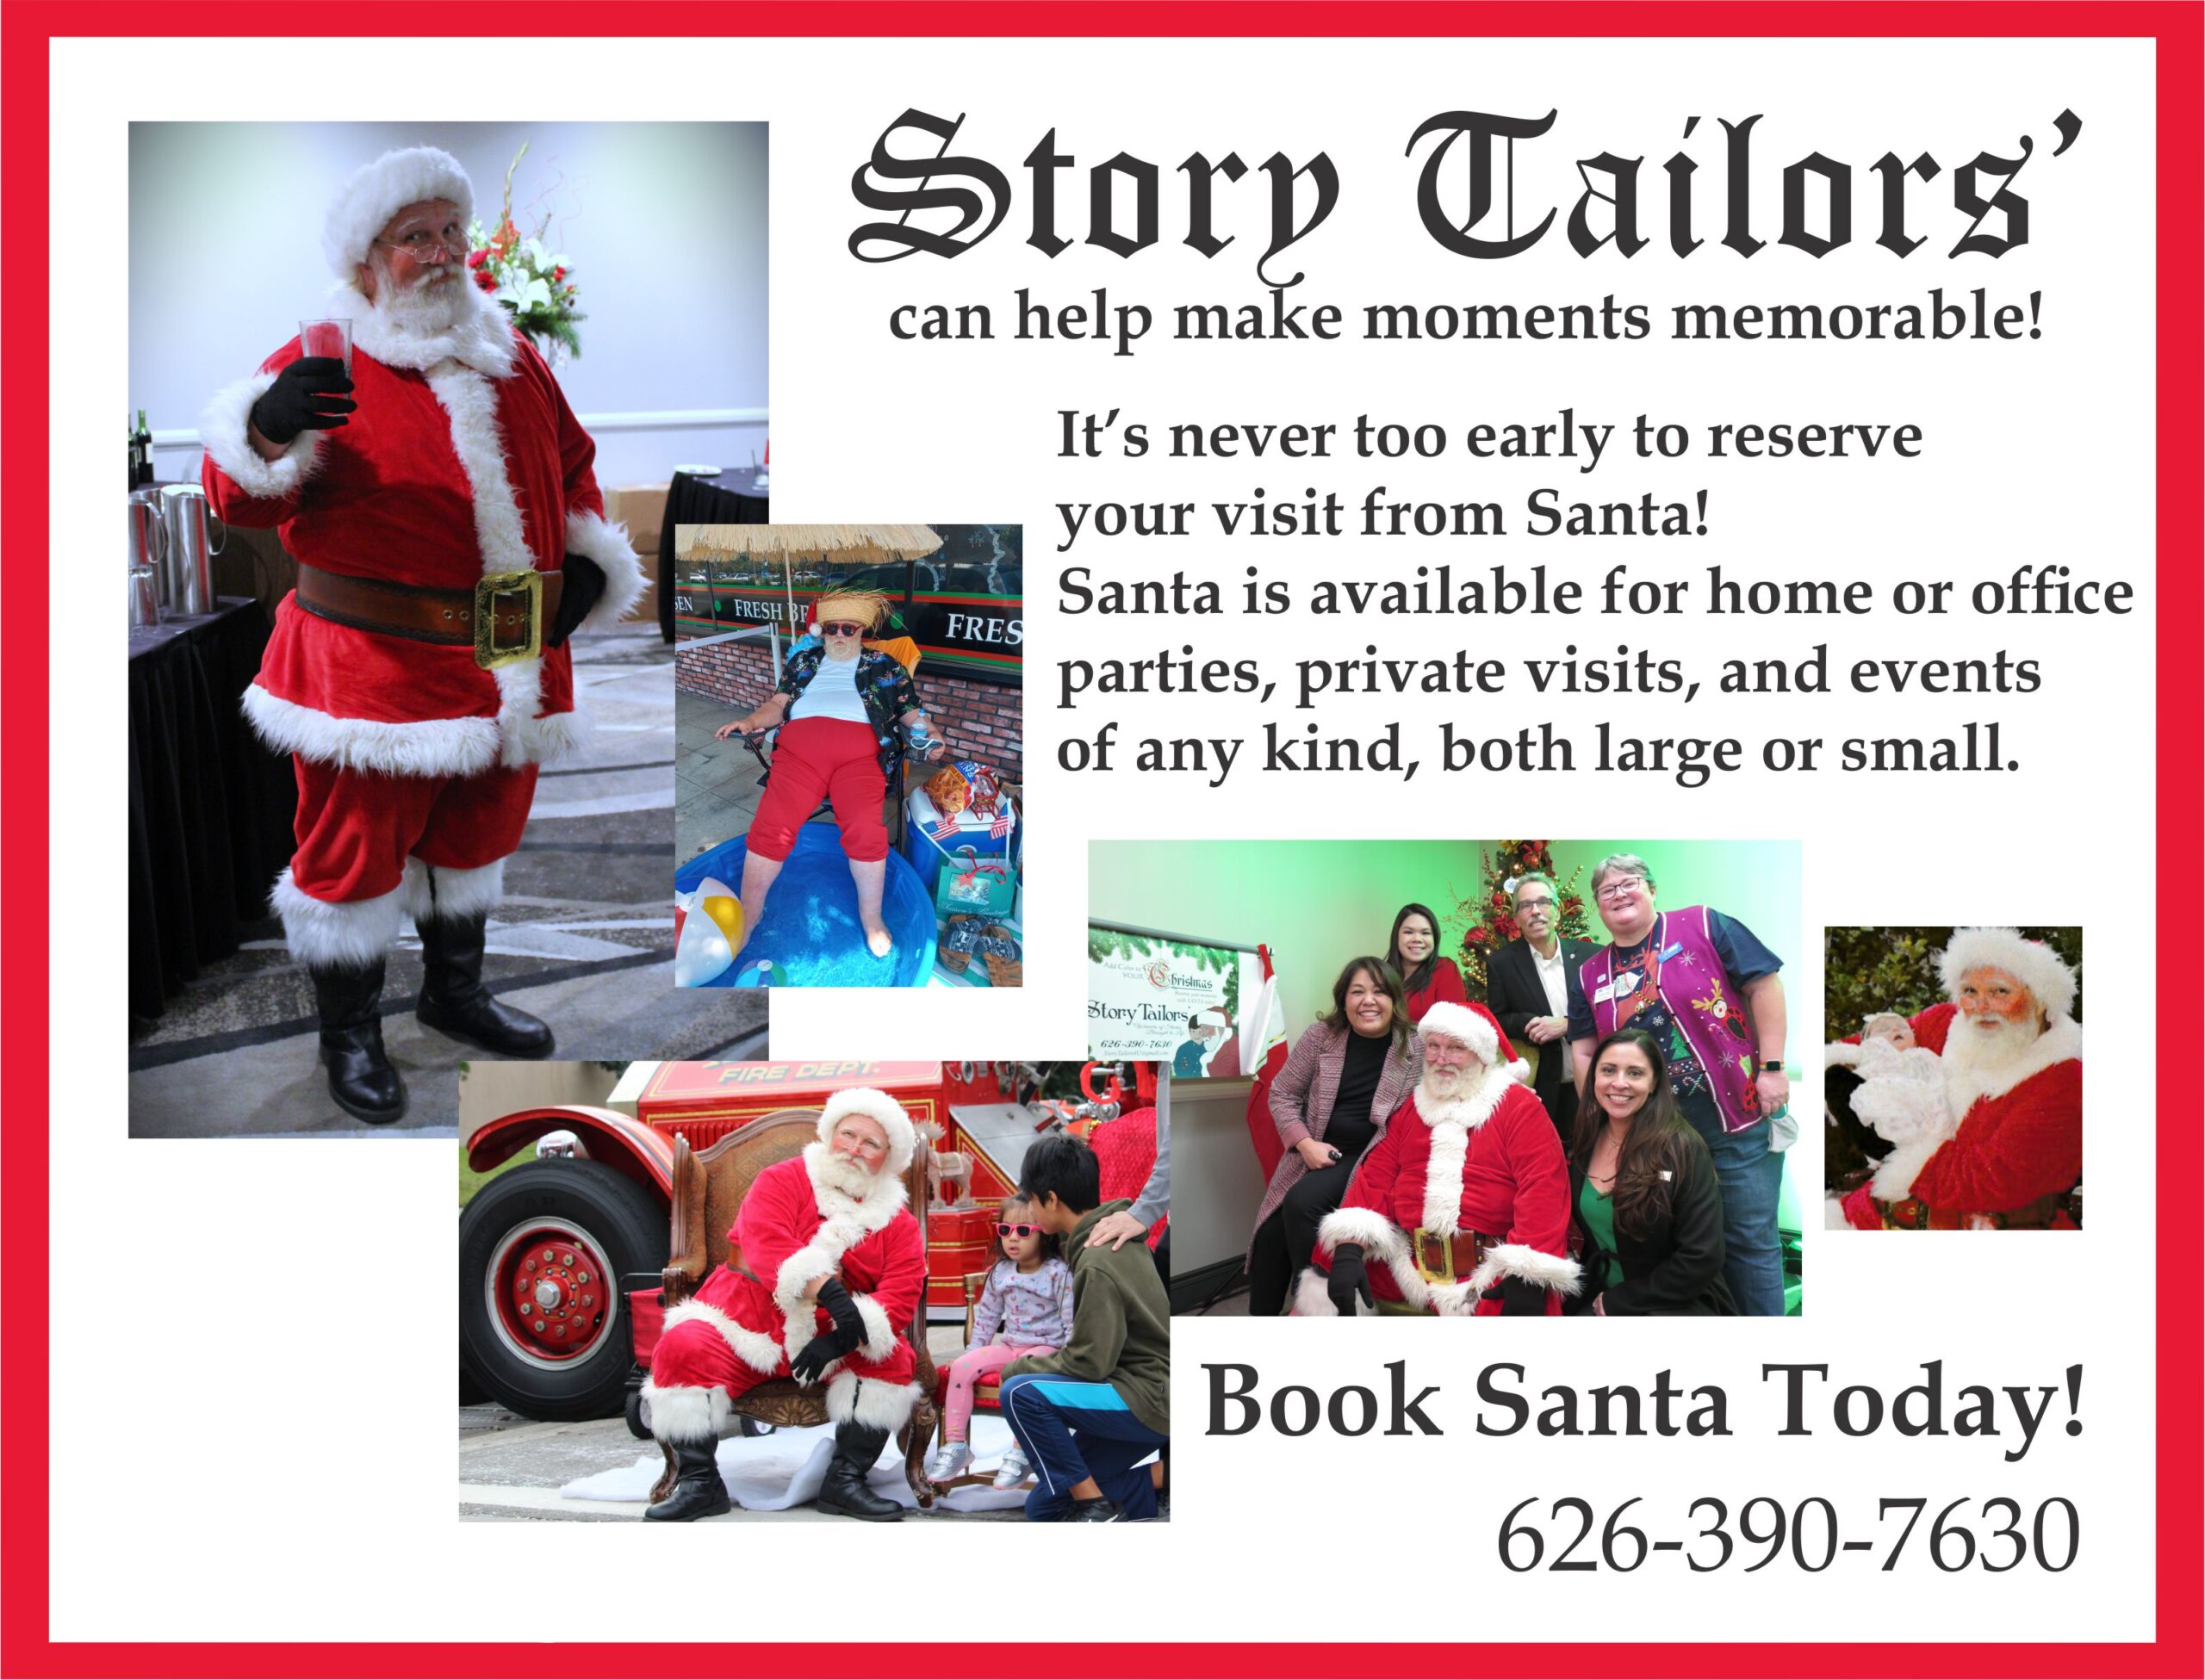 Story Tailors flyer showing Santa Clause 